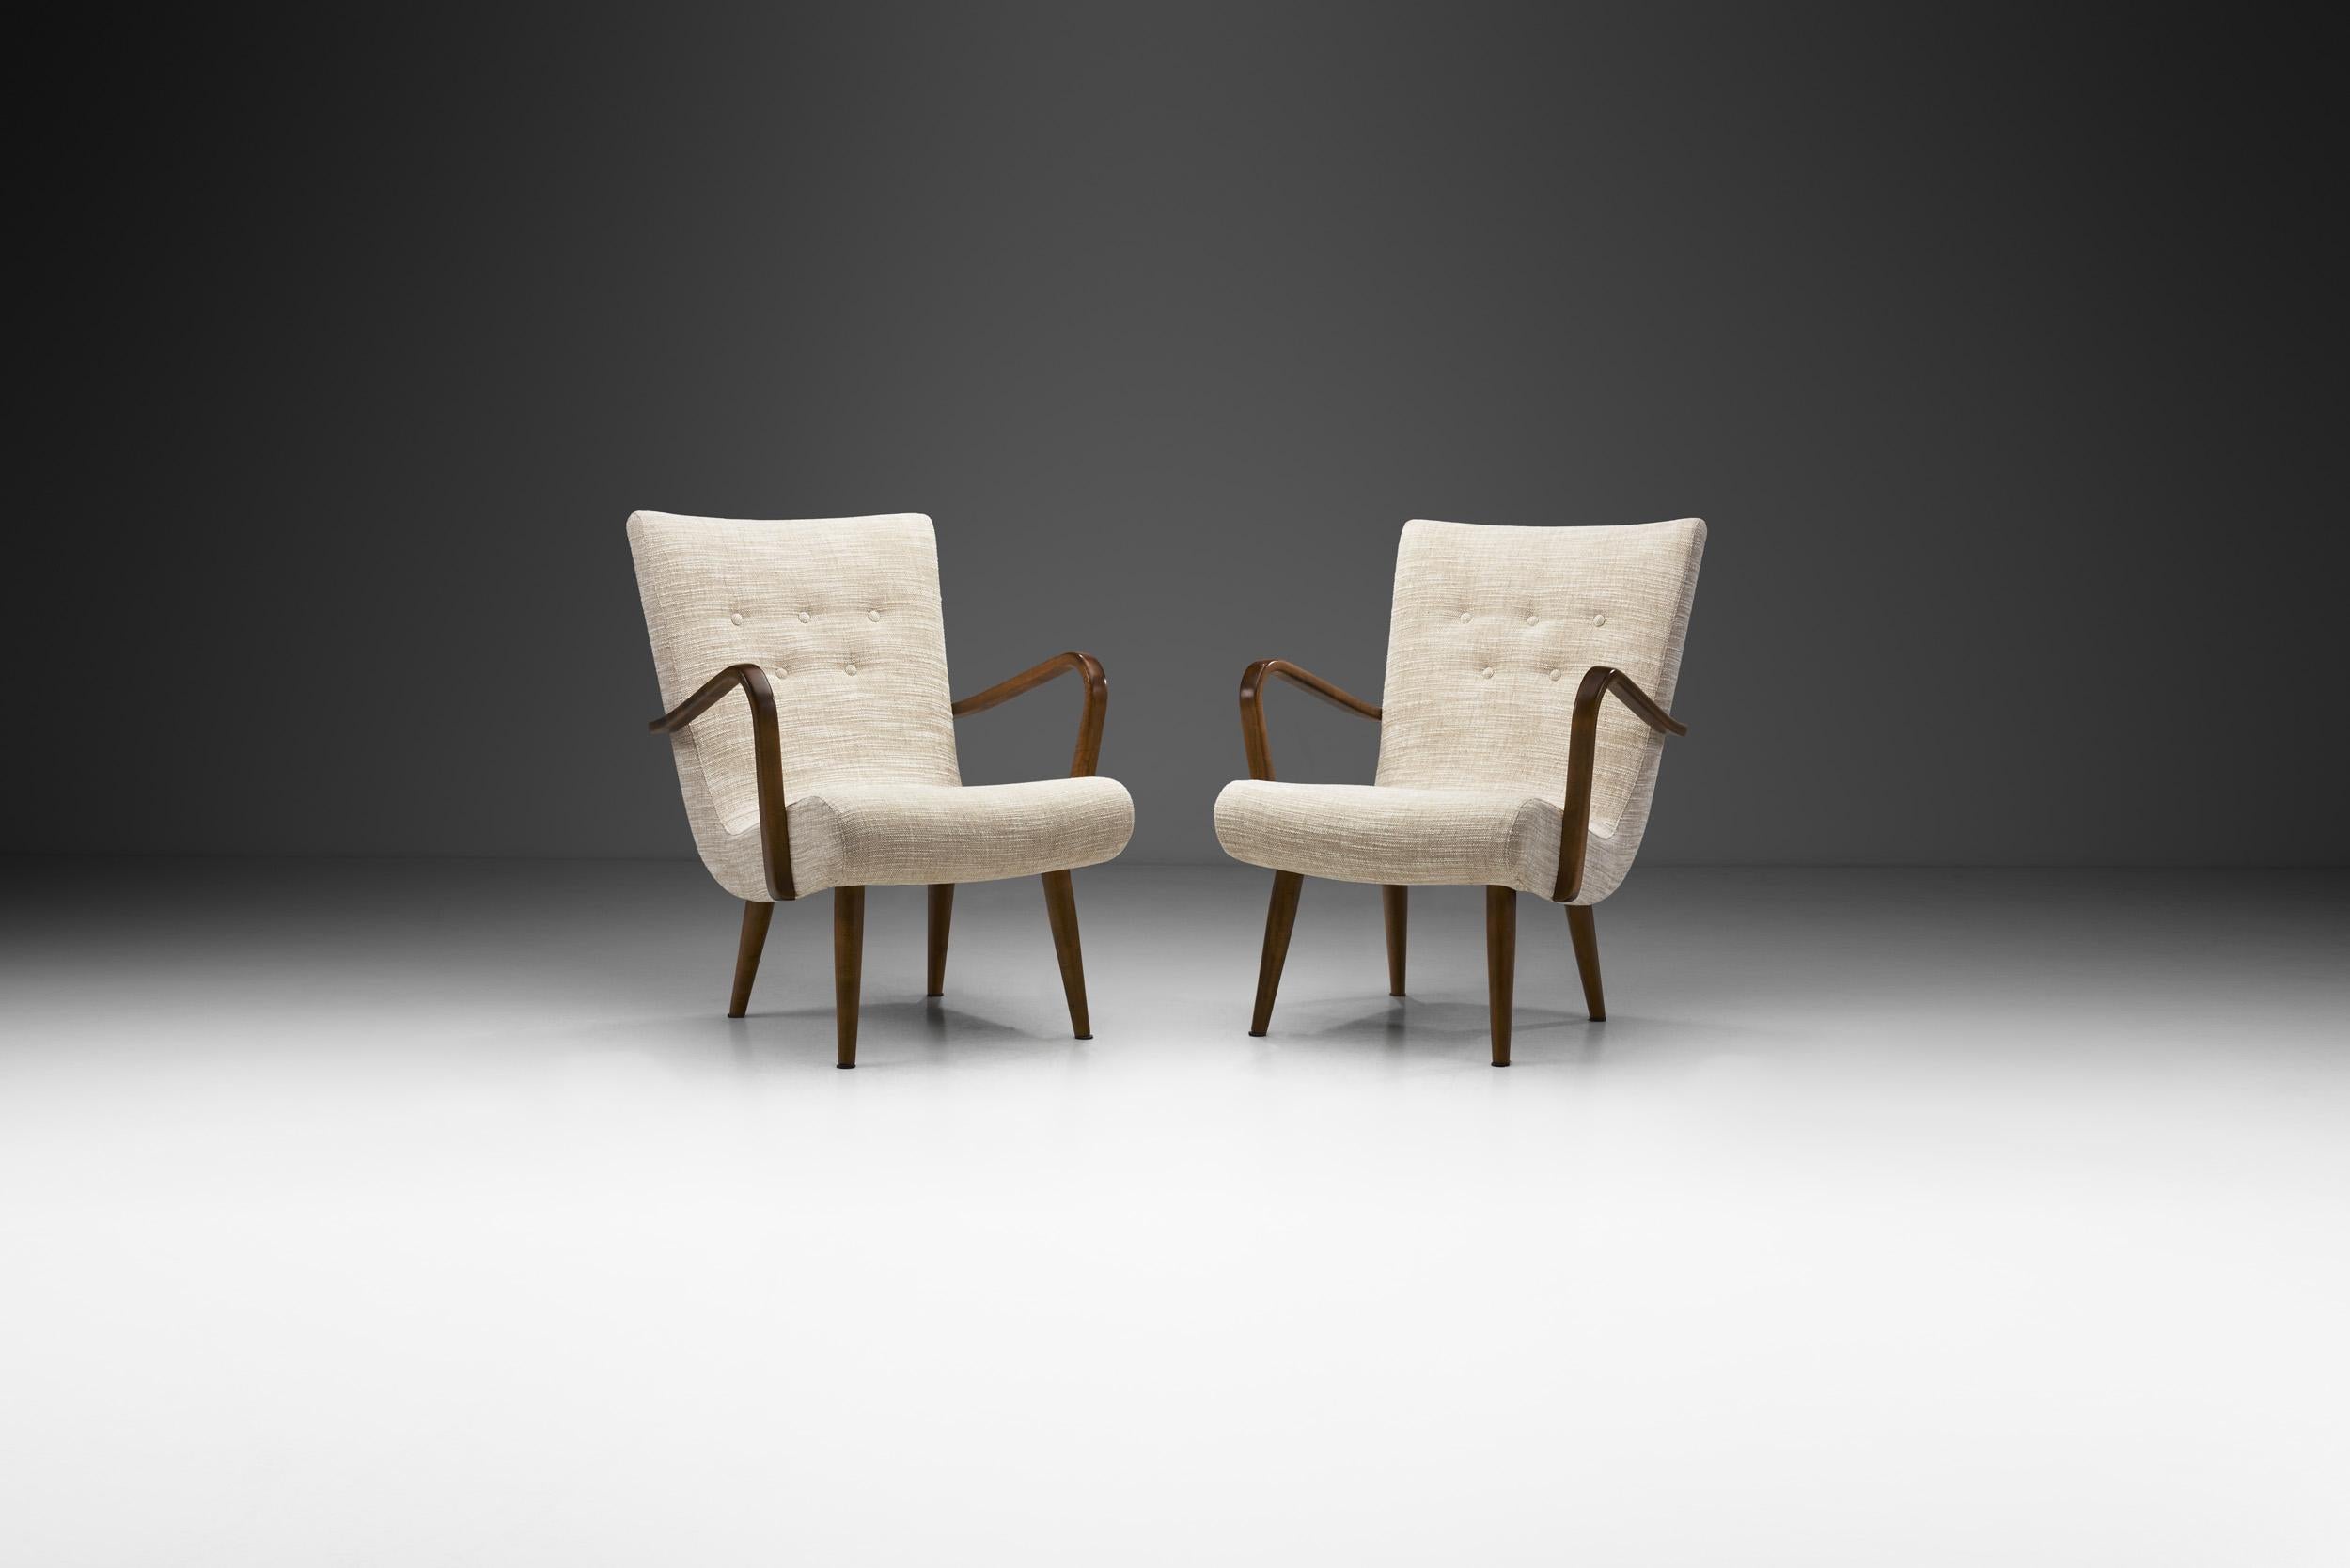 The seating designs of the architect and designer, s, have been gradually more and more recognized world-wide, which resulted in the recent exhibition titled “Forgotten Ornäs”. His designs, including these armchairs, are defined by the homely